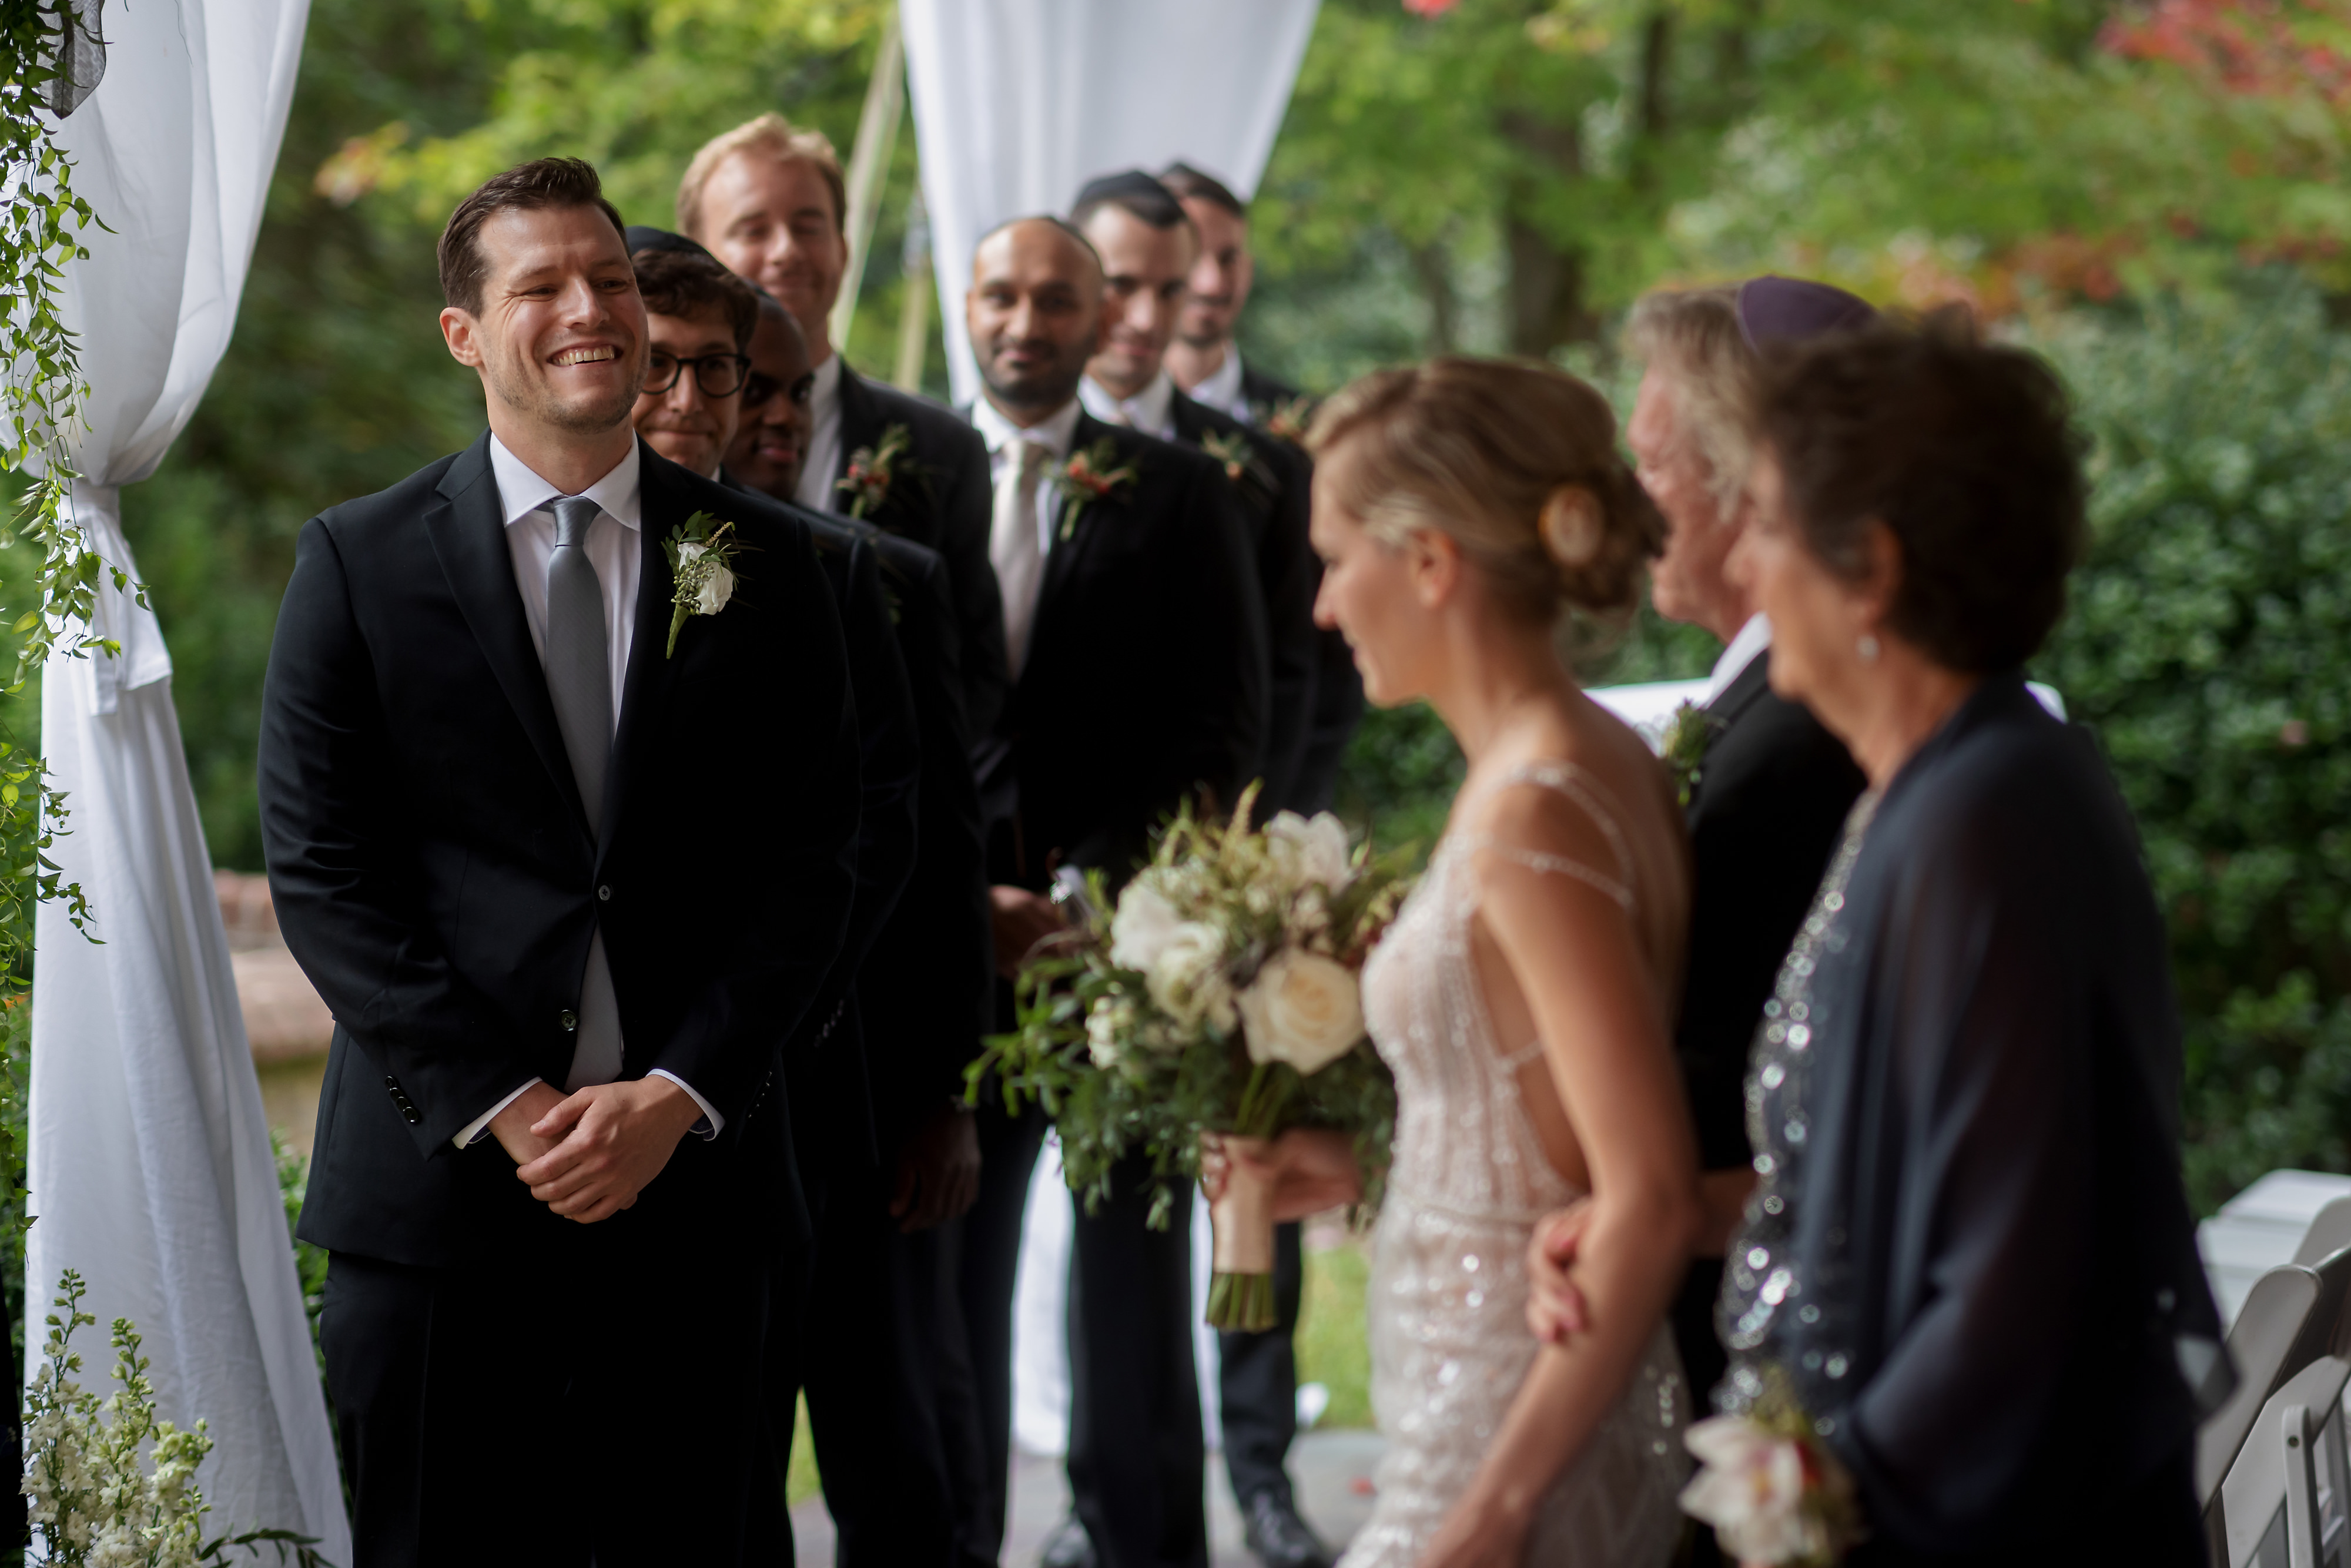 bride walking down aisle with parents during ceremony at Mount Vernon in Virginia